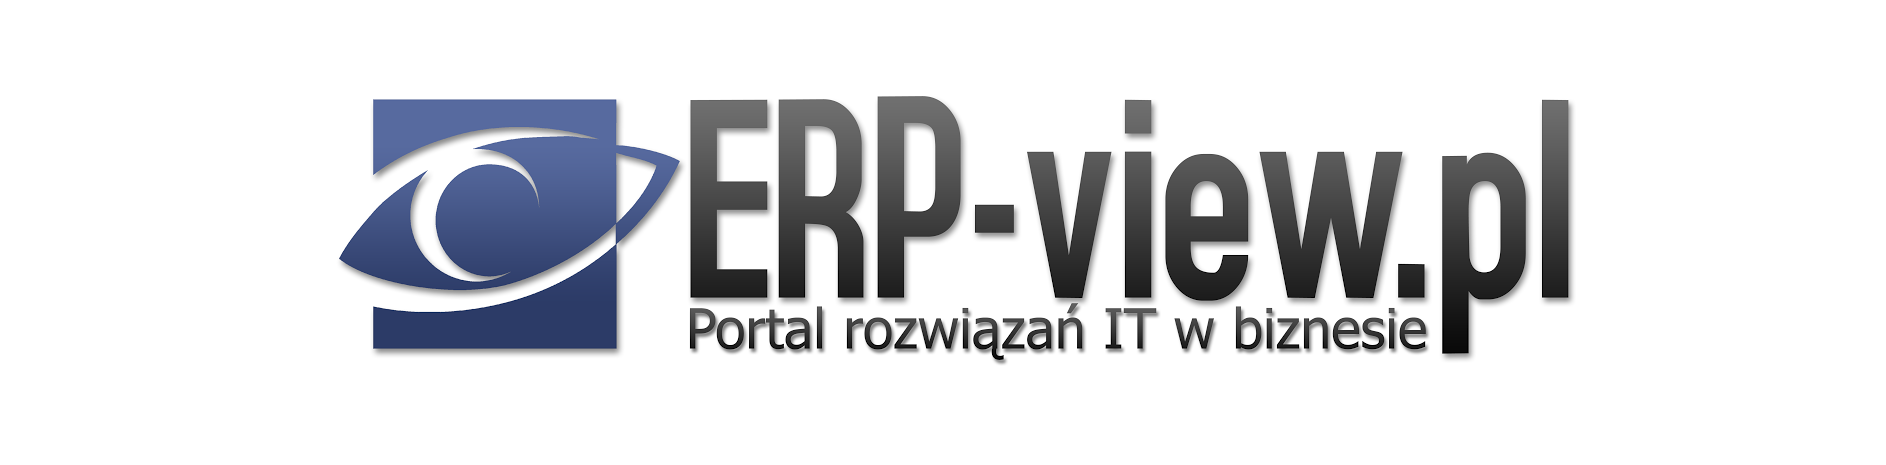 ERP-view.pl